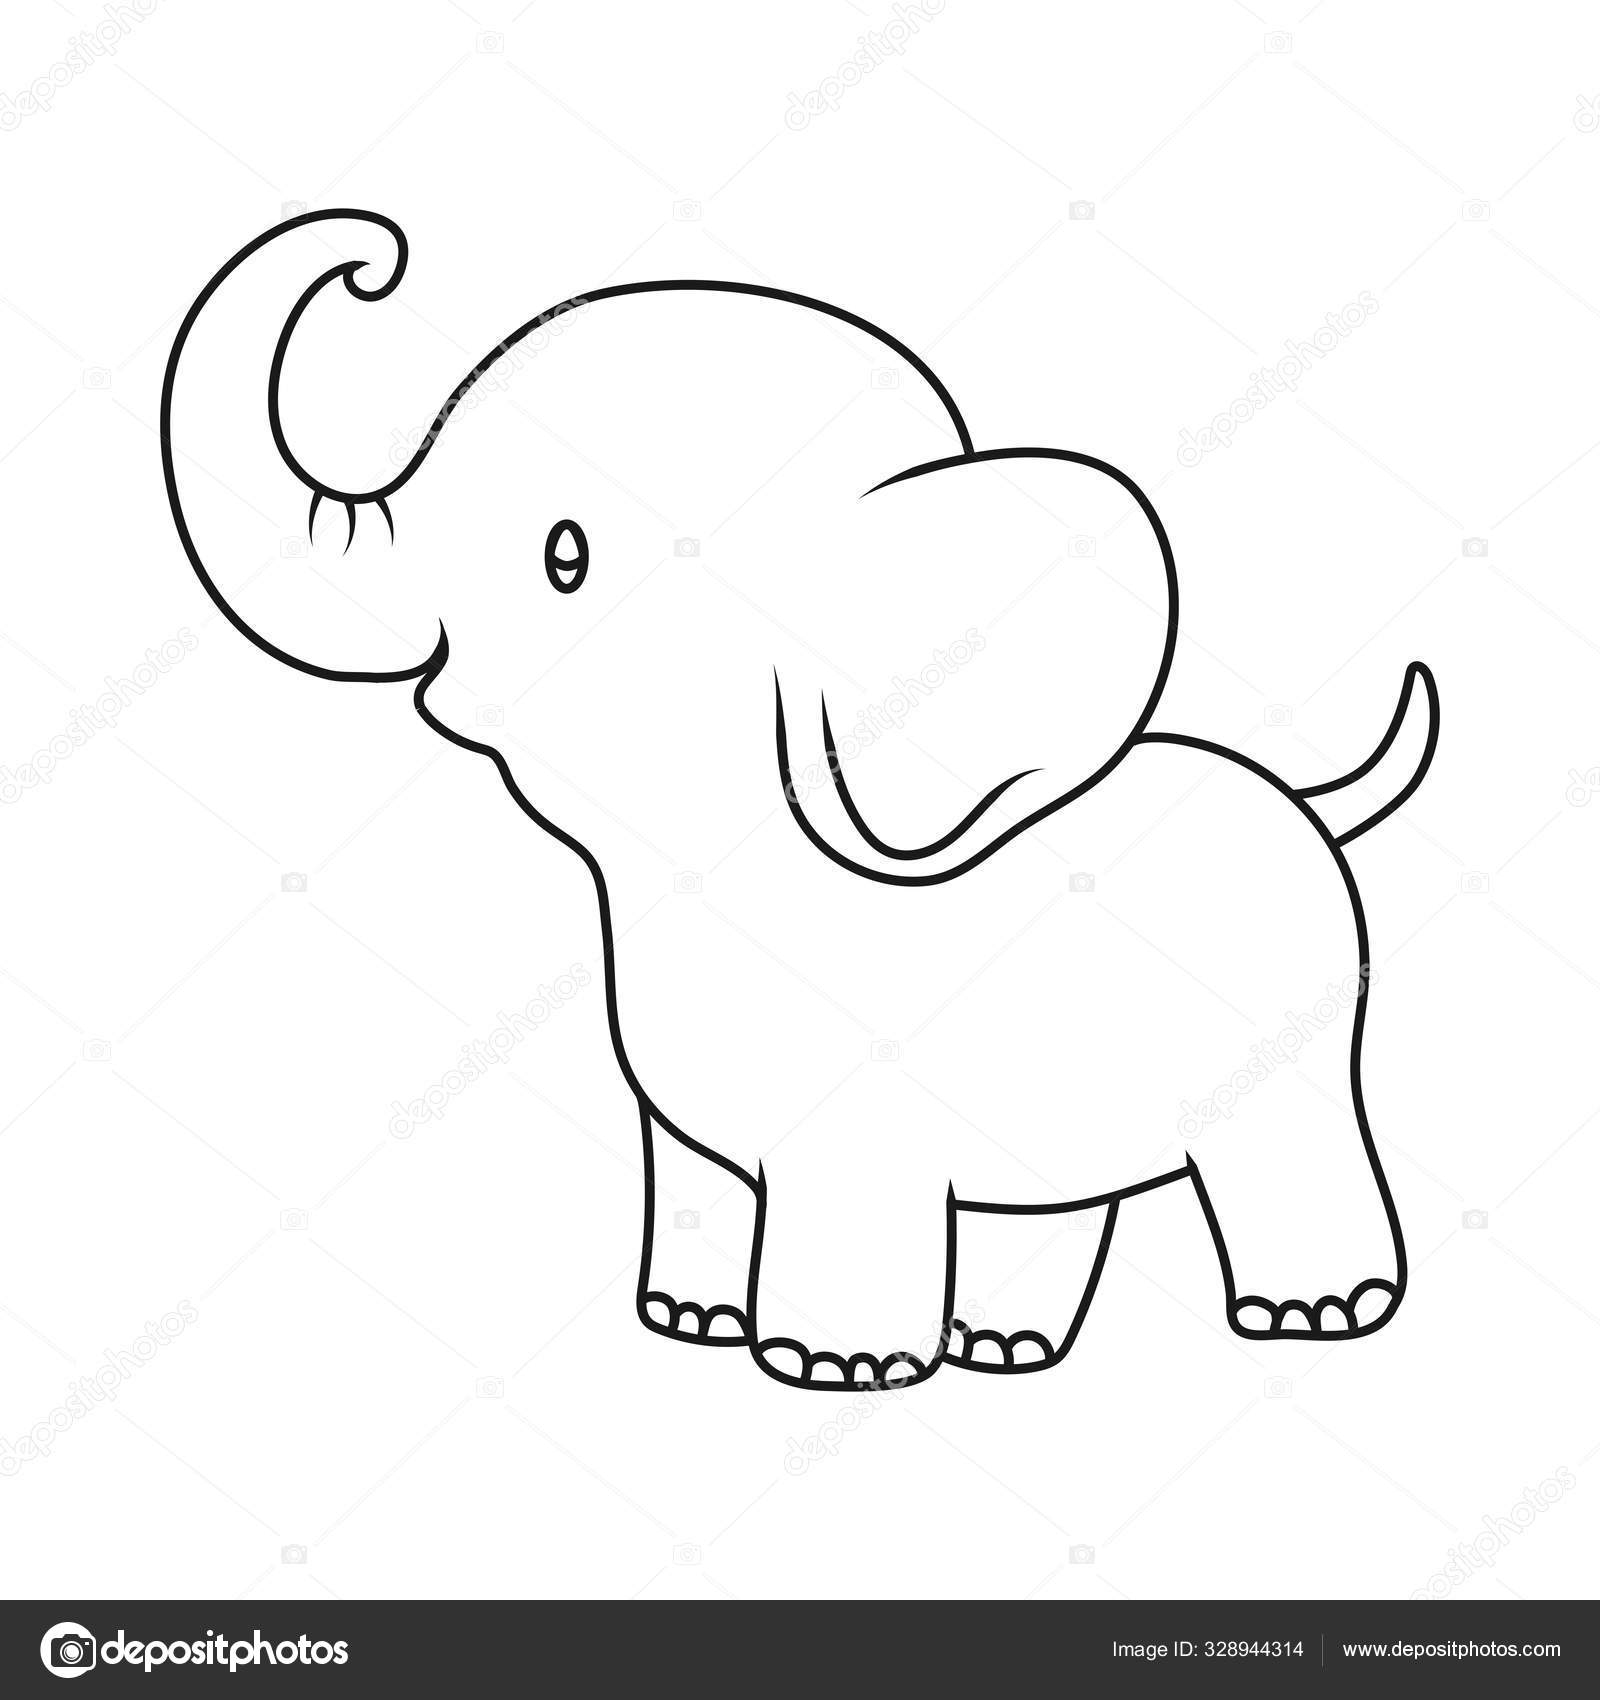 Elephant (Indian/Asian) Drawing Lesson